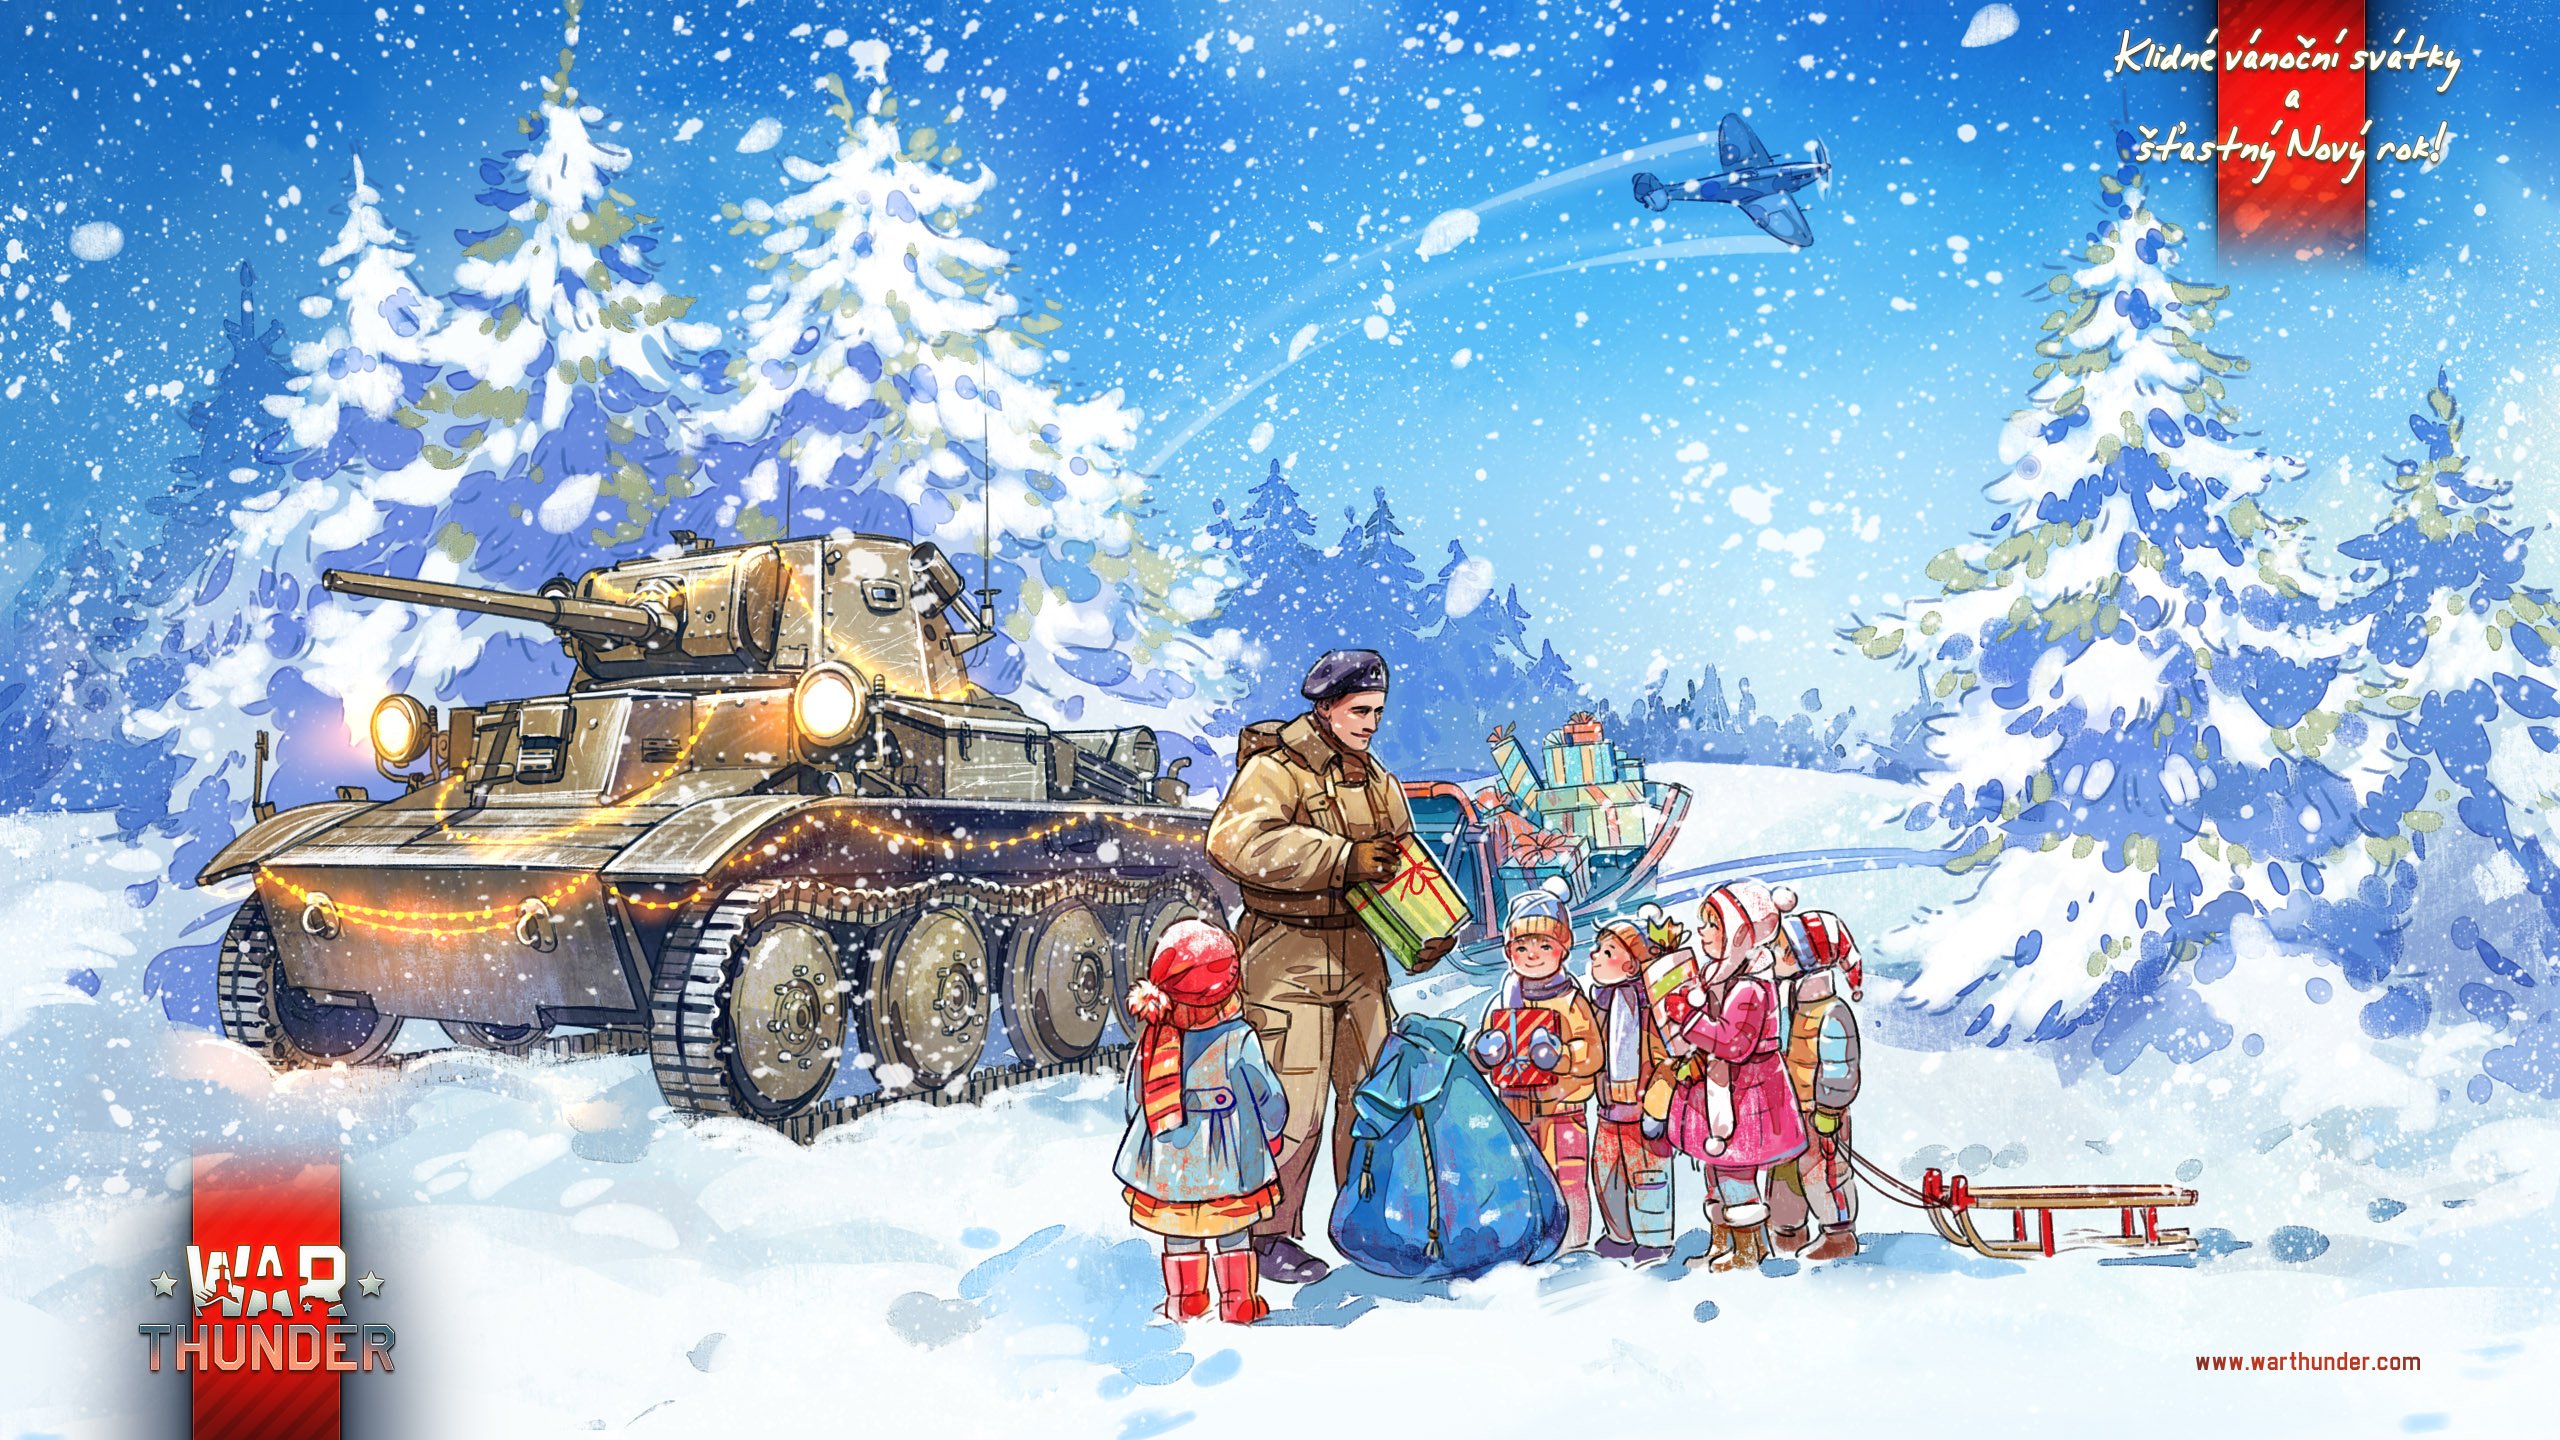 war, Thunder, Game, Video, Military, War, Battle, Wwll, Air, Force, Fighter, Jet, Warplane, Plane, Aircraft, Action, Fighting, Combat, Flight, Simulator, Mmo, Online, Shooter, Weapon, Tank, Strategy, Christmas Wallpaper